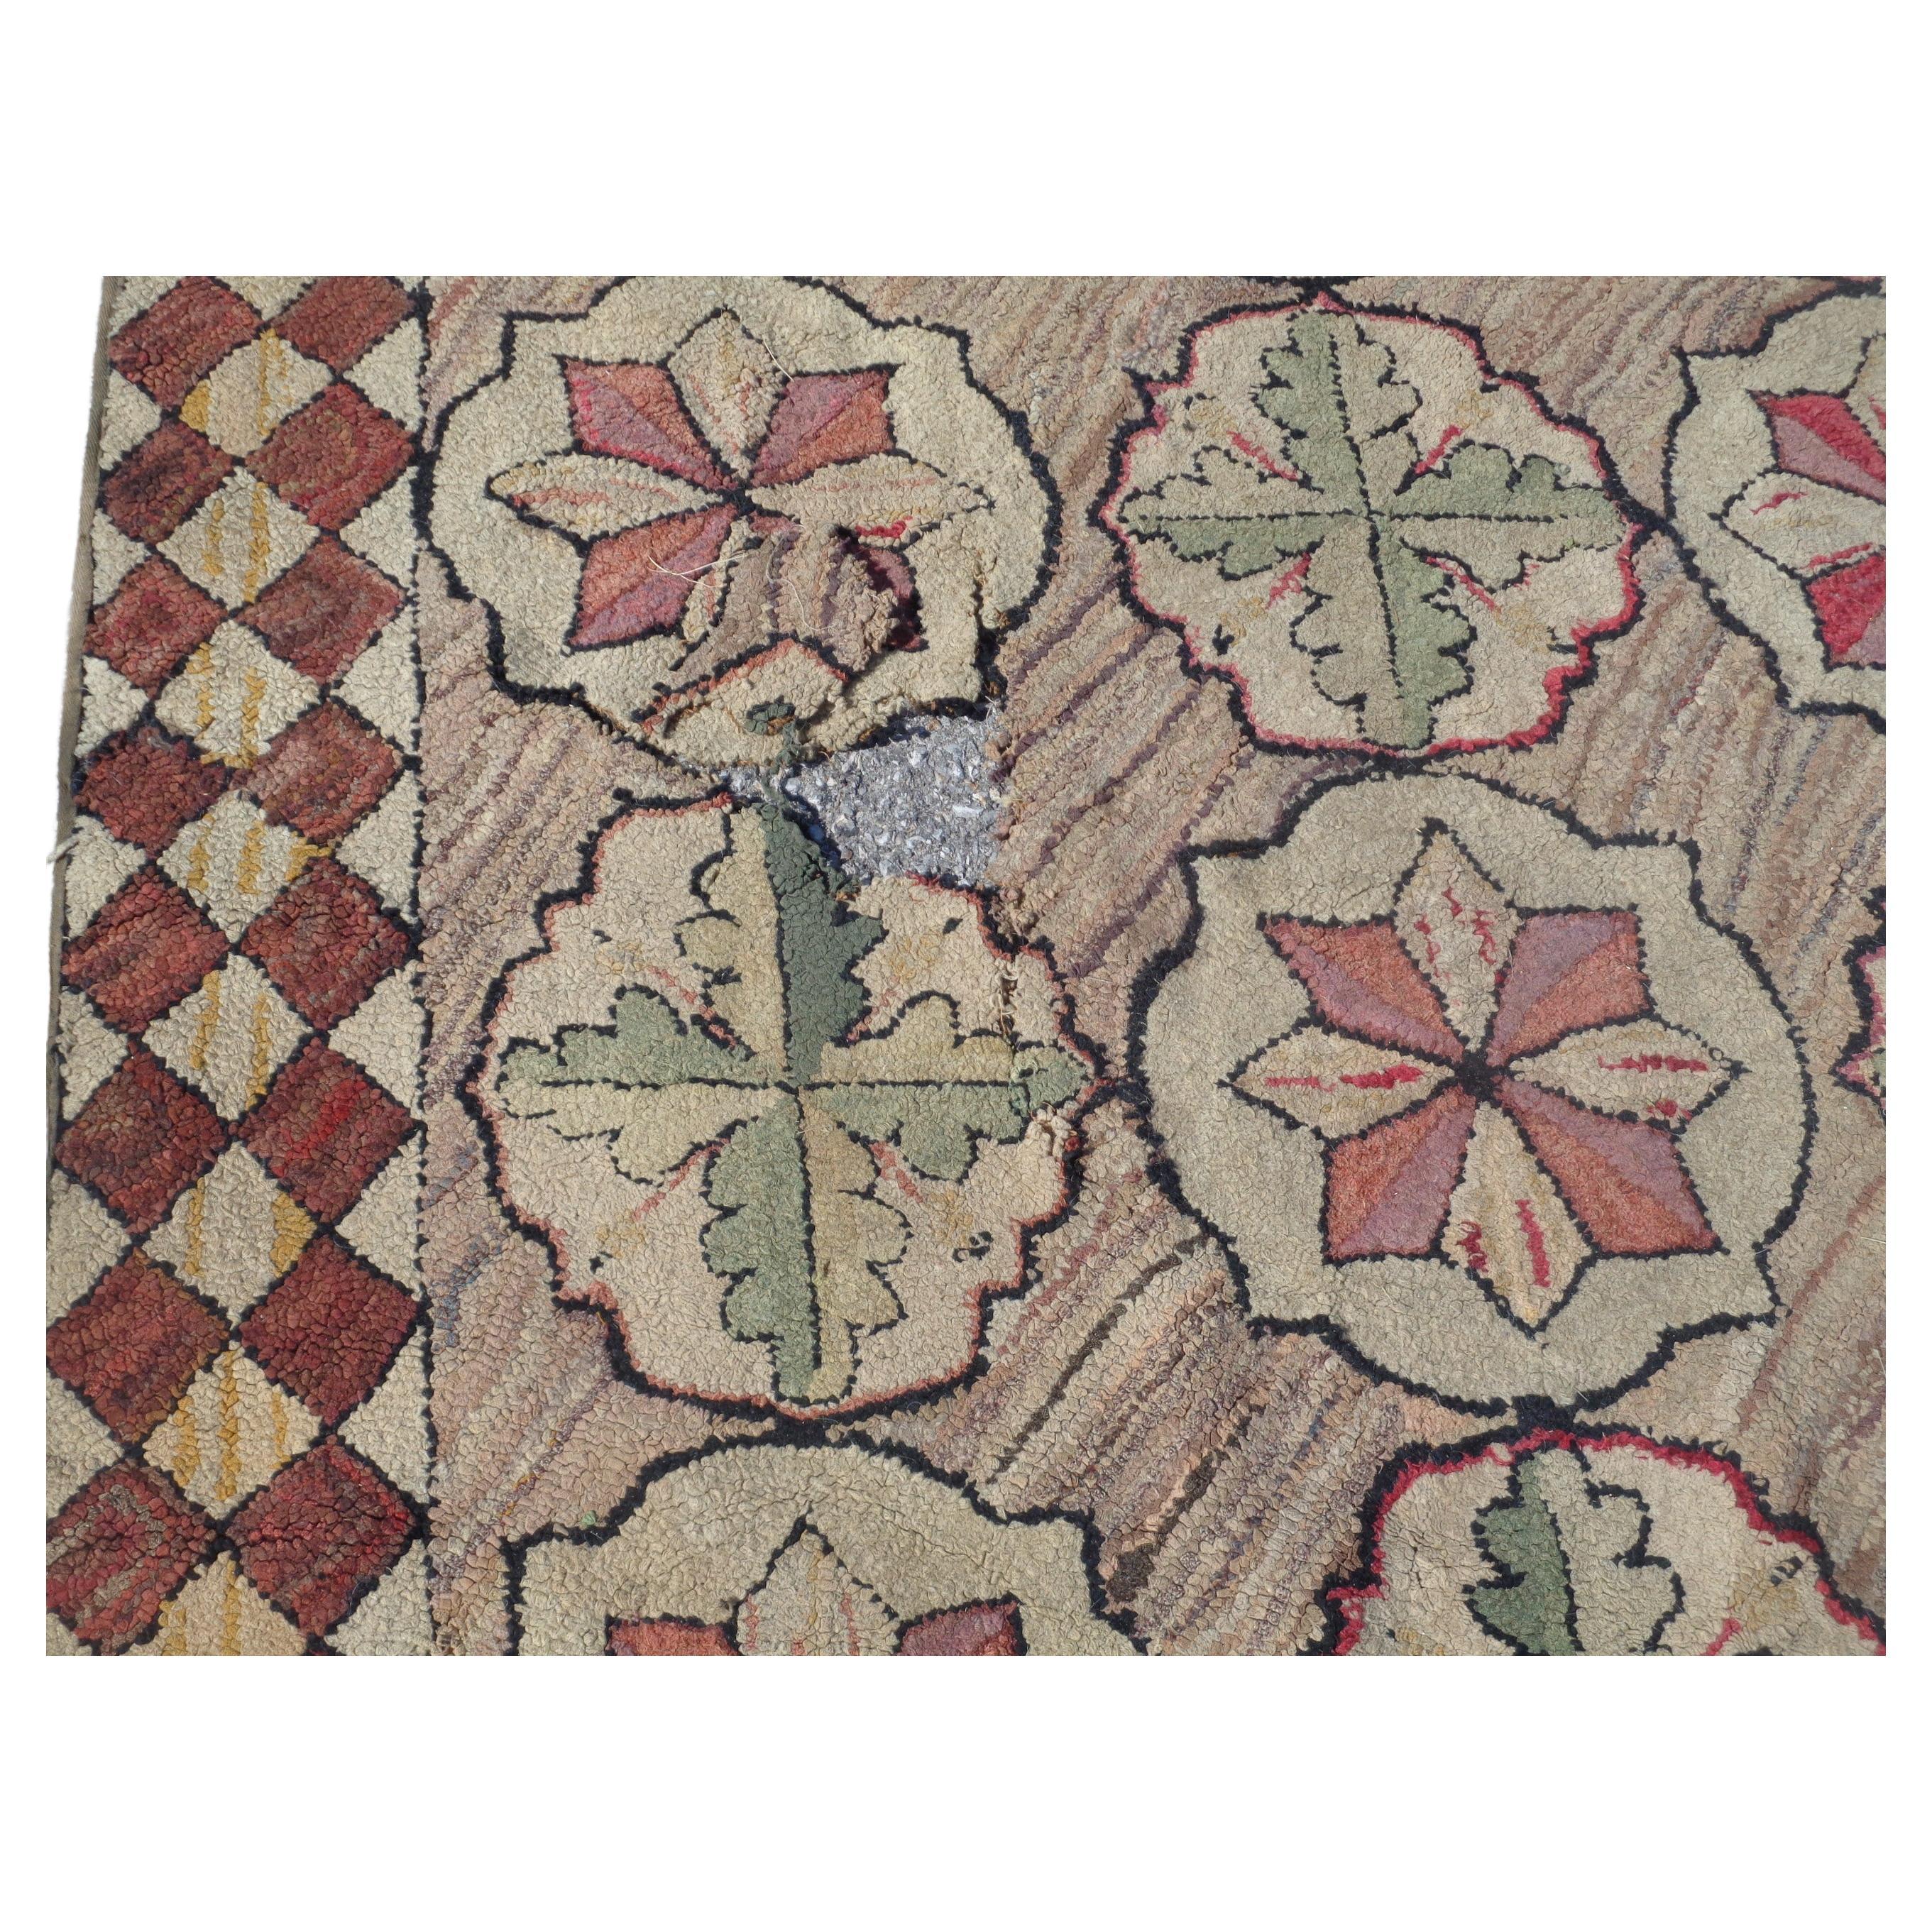 Wool Antique American Hand Woven Hooked Rug Long Runner, Circa 1880-1900 For Sale